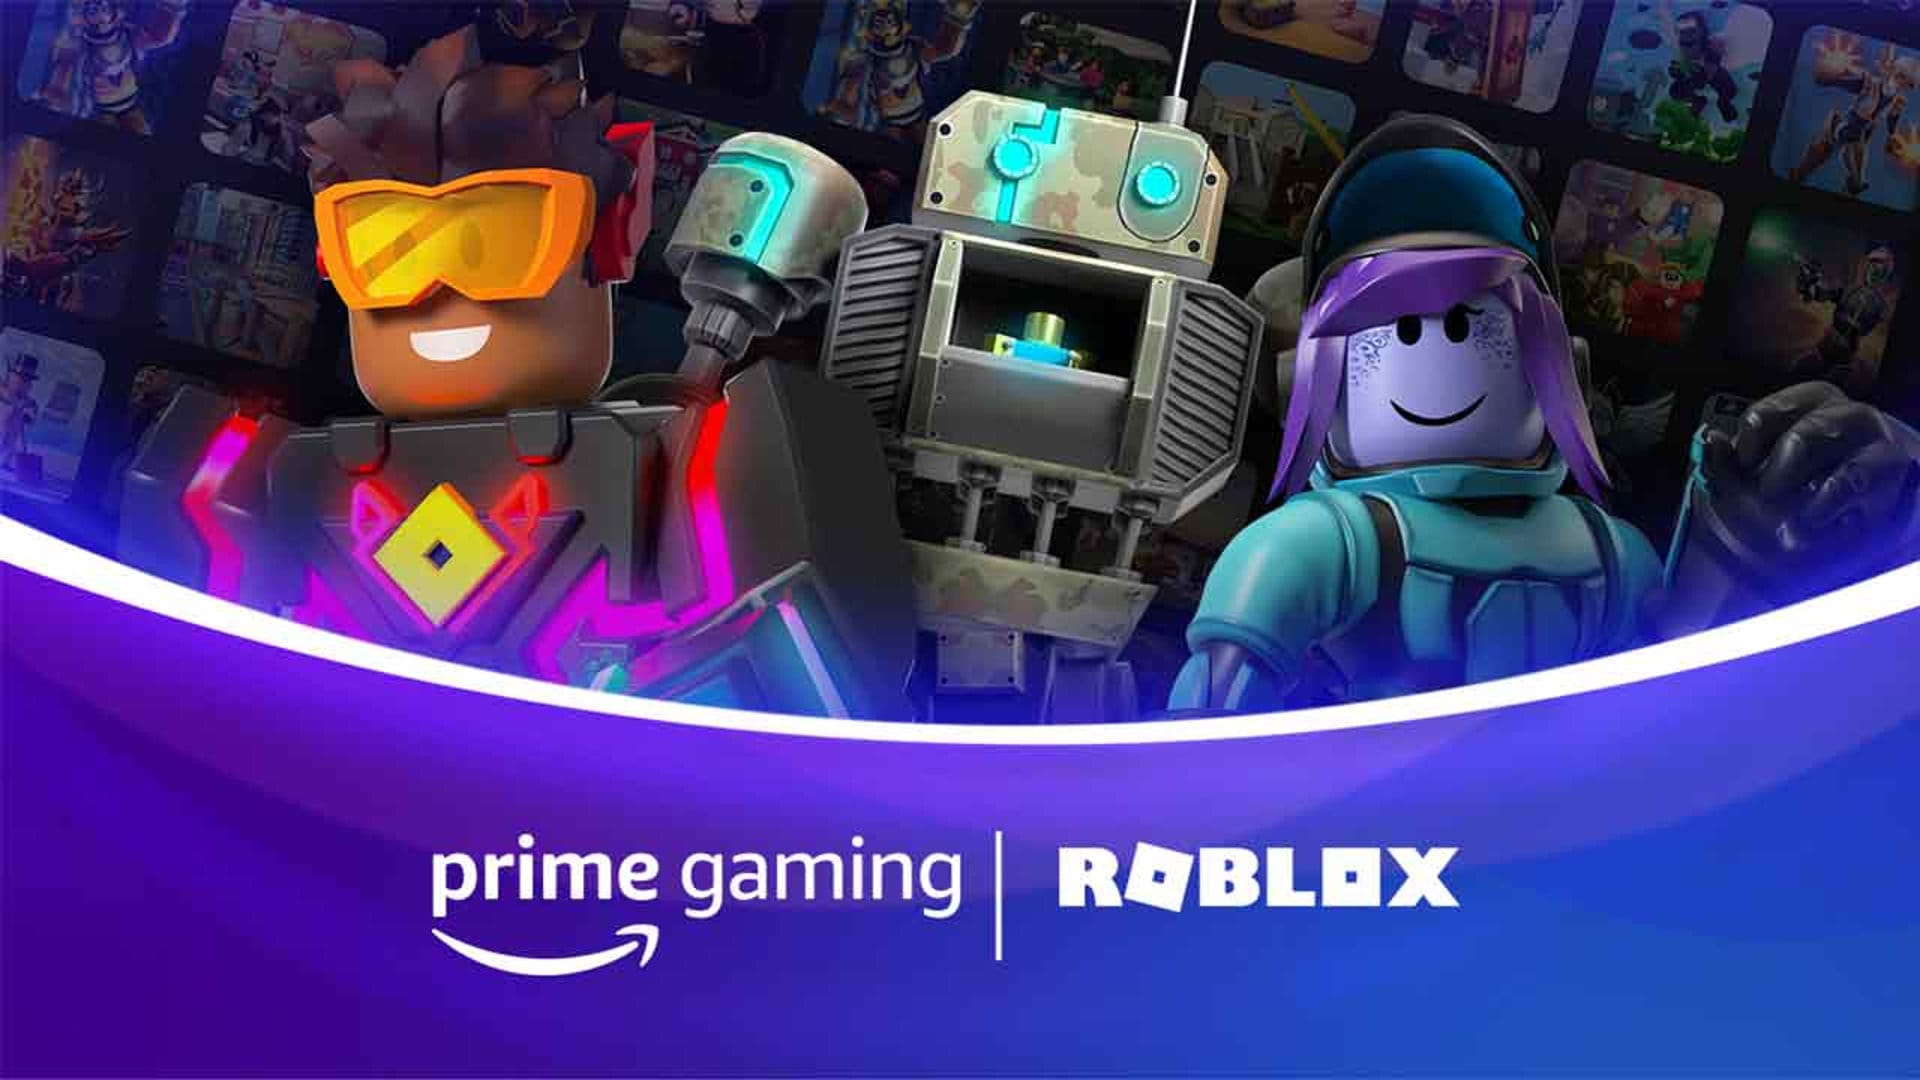 Roblox Prime Gaming Items Are Coming Techraptor - roblox new items coming